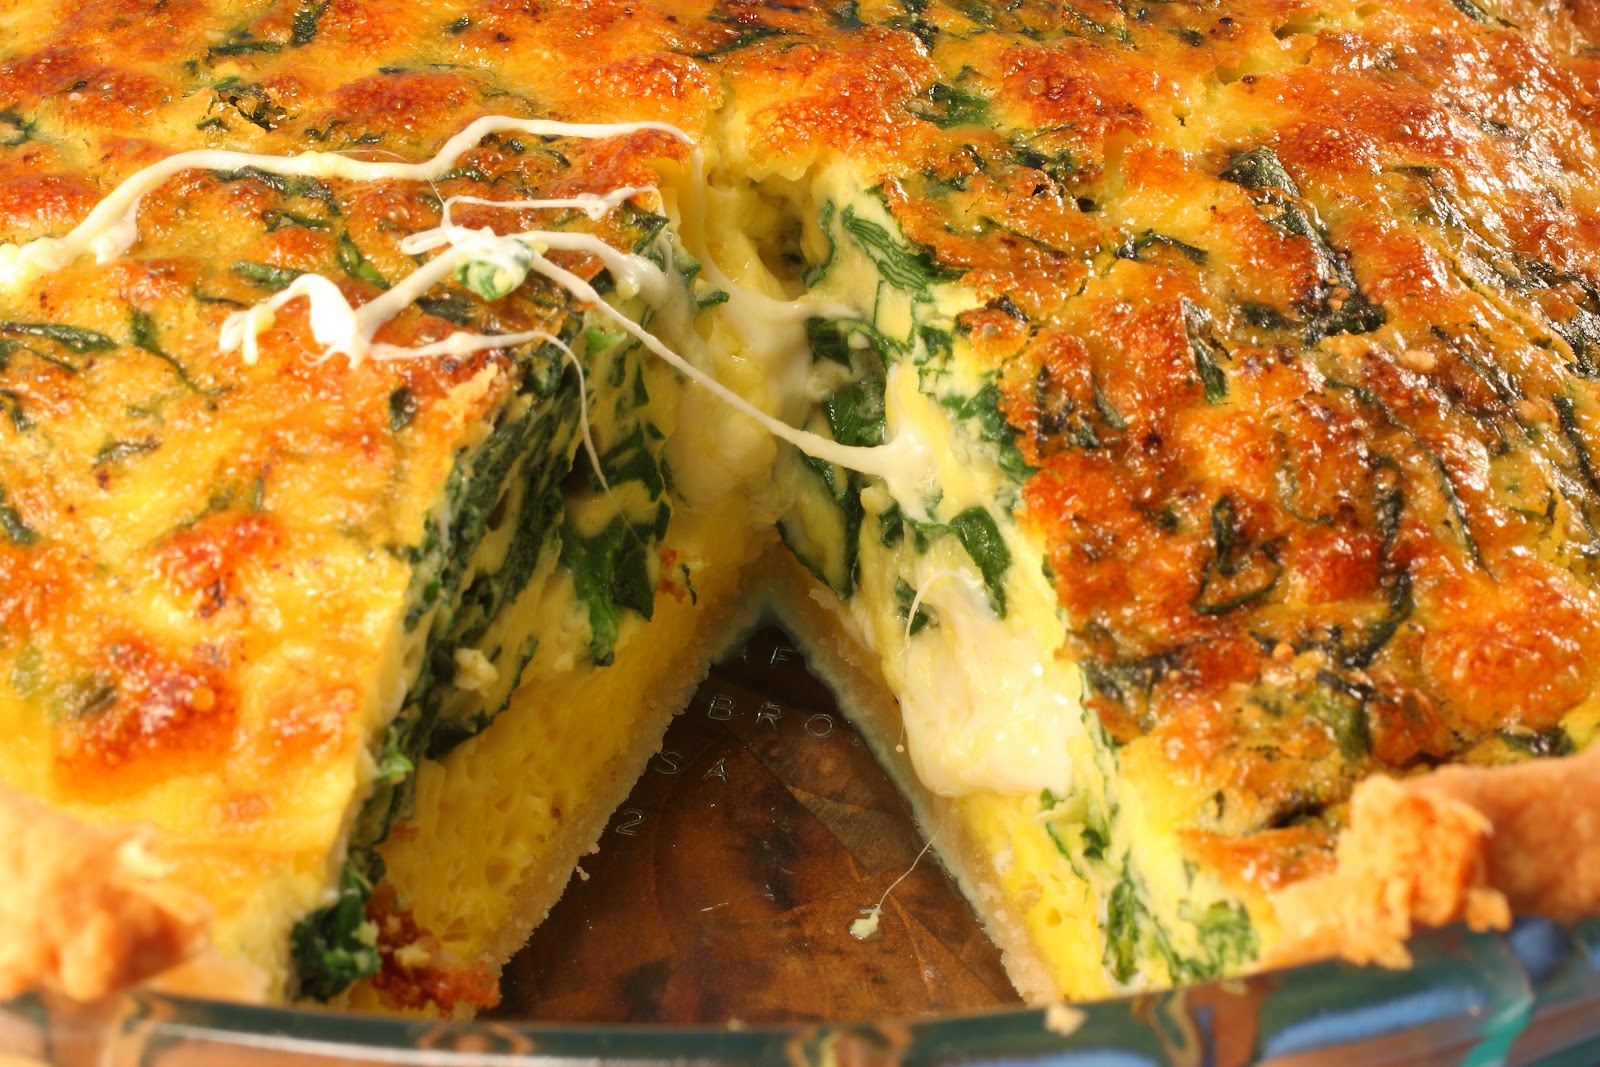 Chef Chuck's Cucina: Chef Chuck's Egg Pie with Spinach